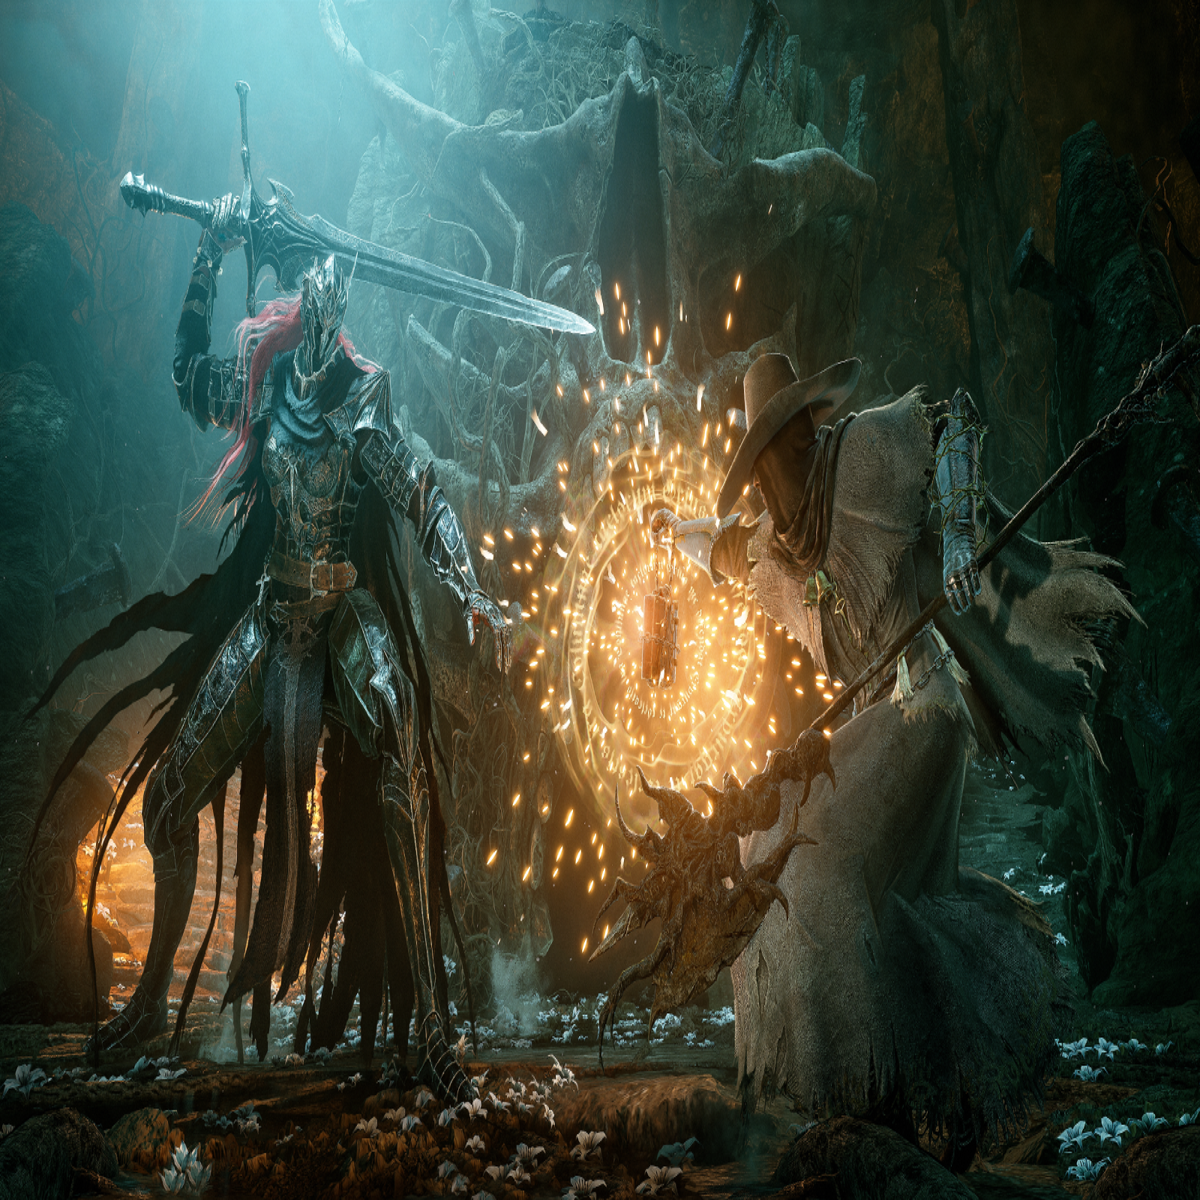 Lords of the Fallen Update 1.1.203 Patch Notes: Bug…